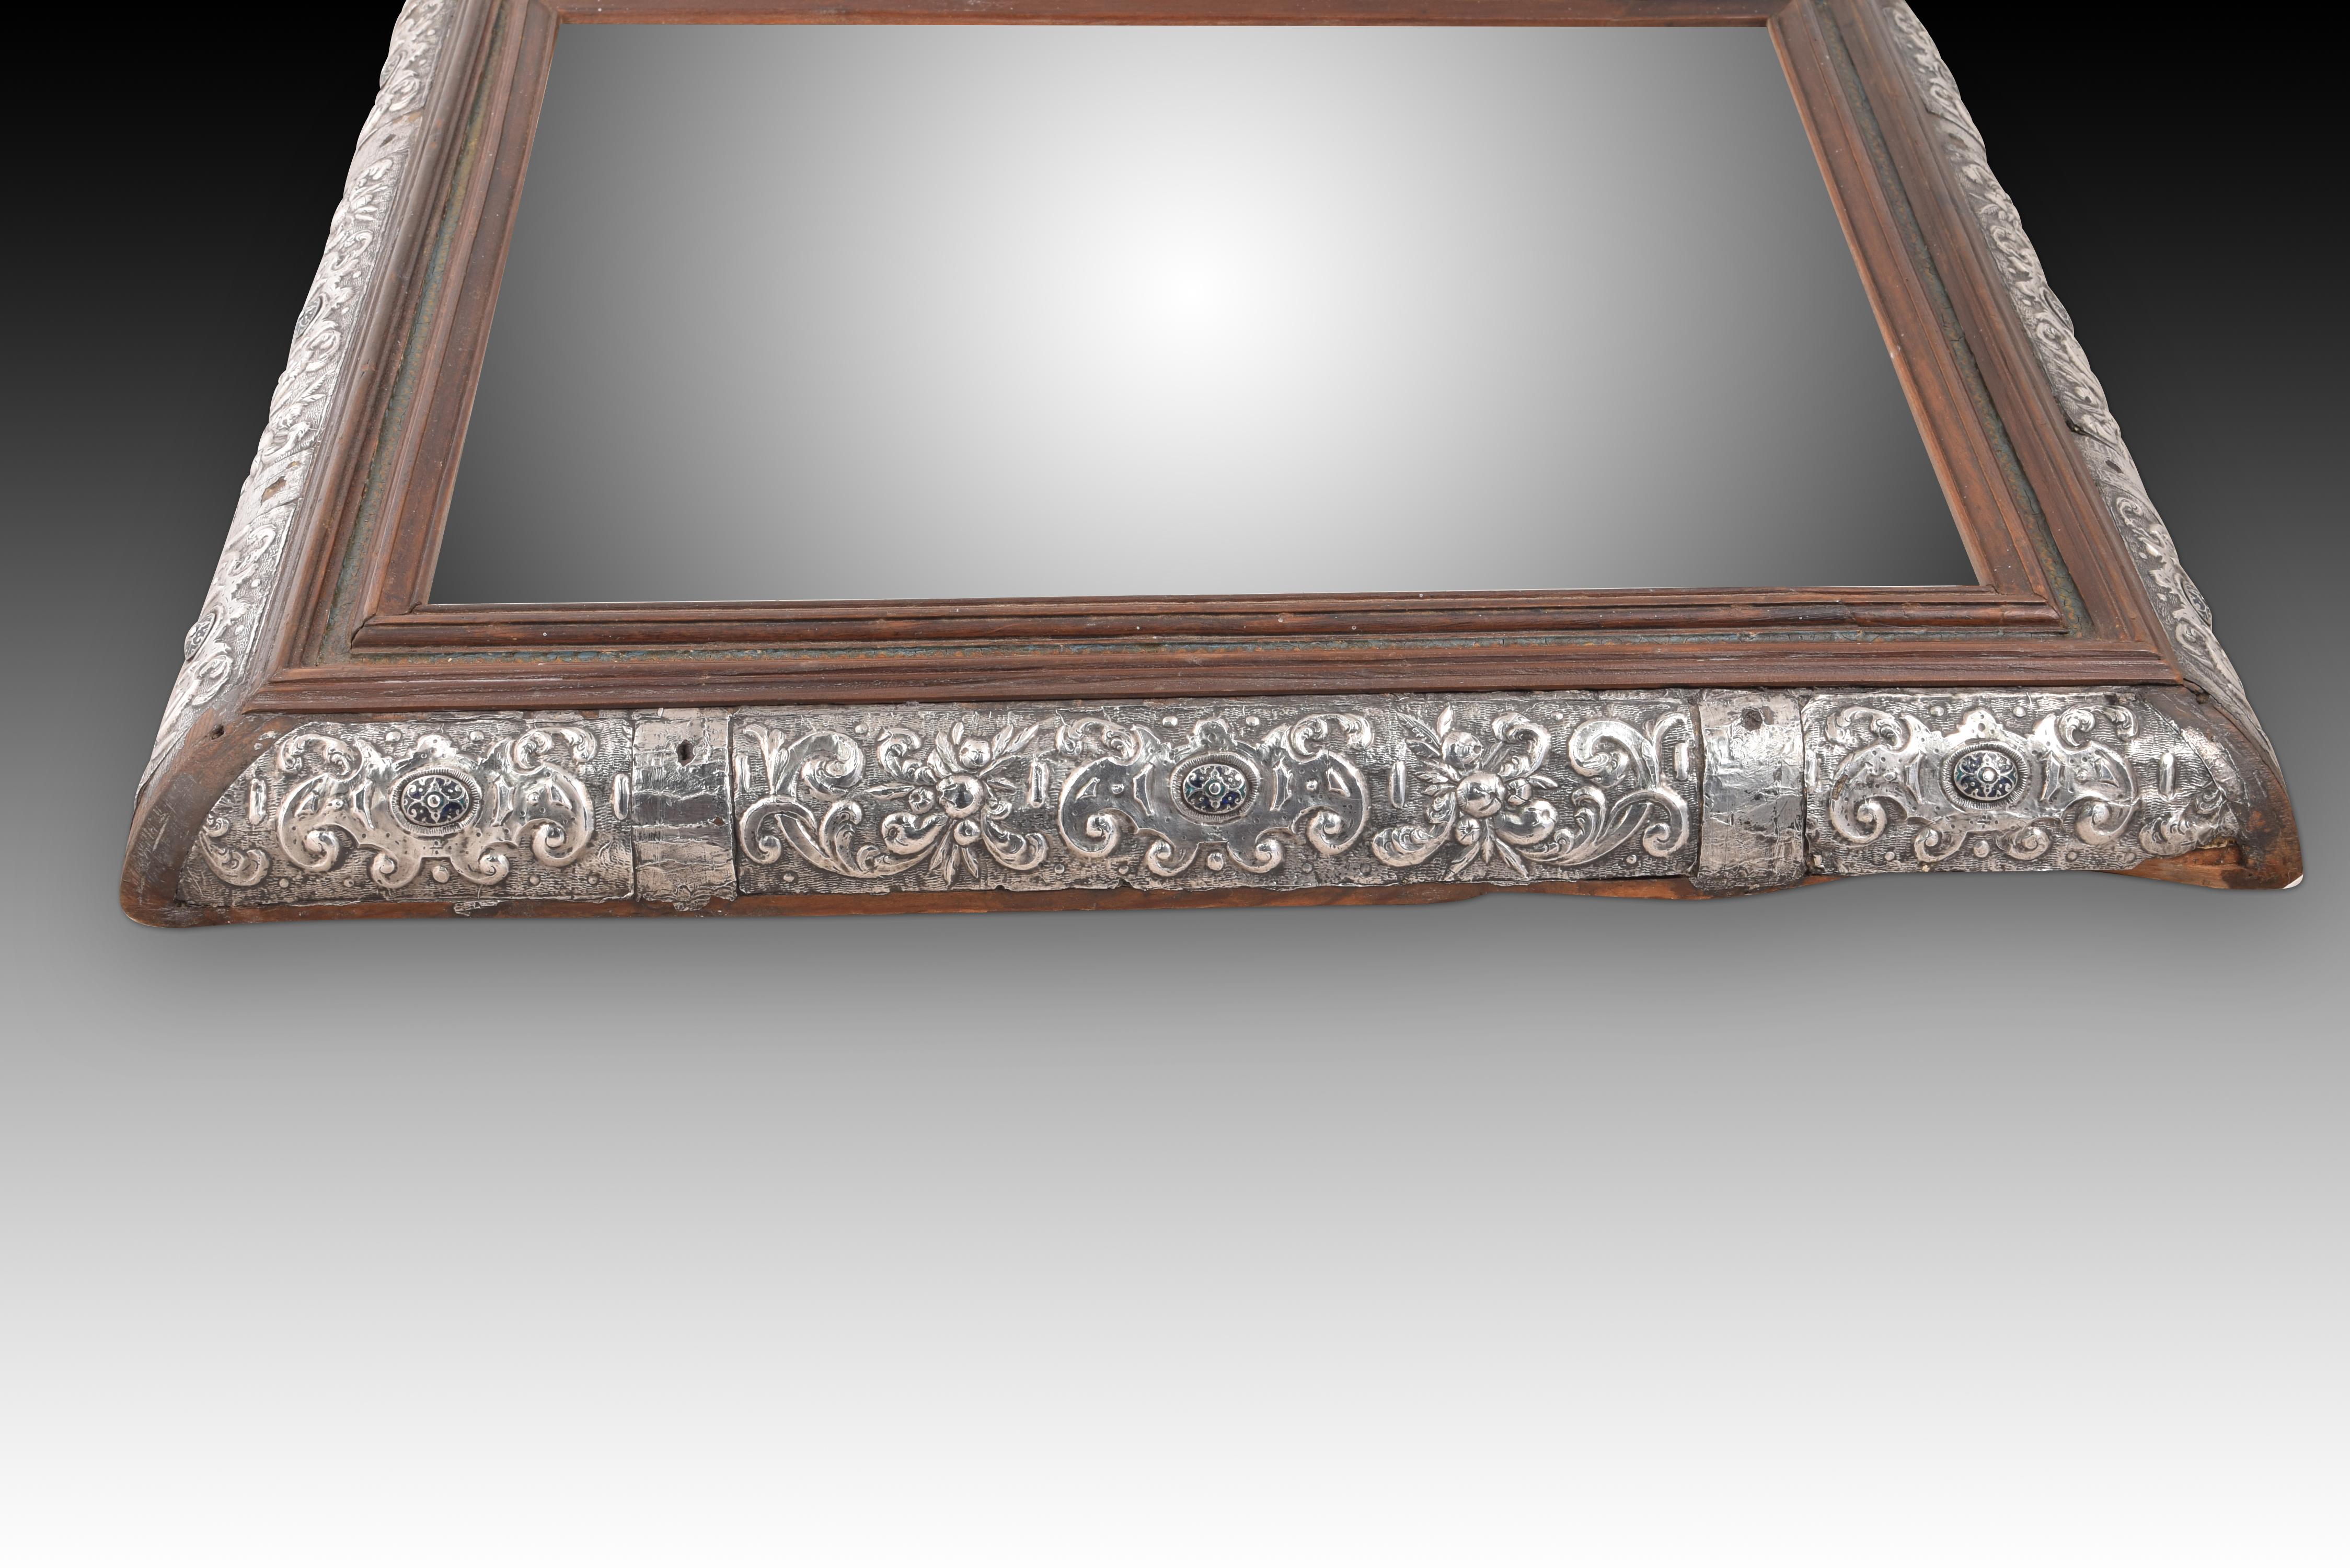 Metal Mirror with cabochon frame. Silver, enamel, wood, etc. Mexican school, 17th c. For Sale